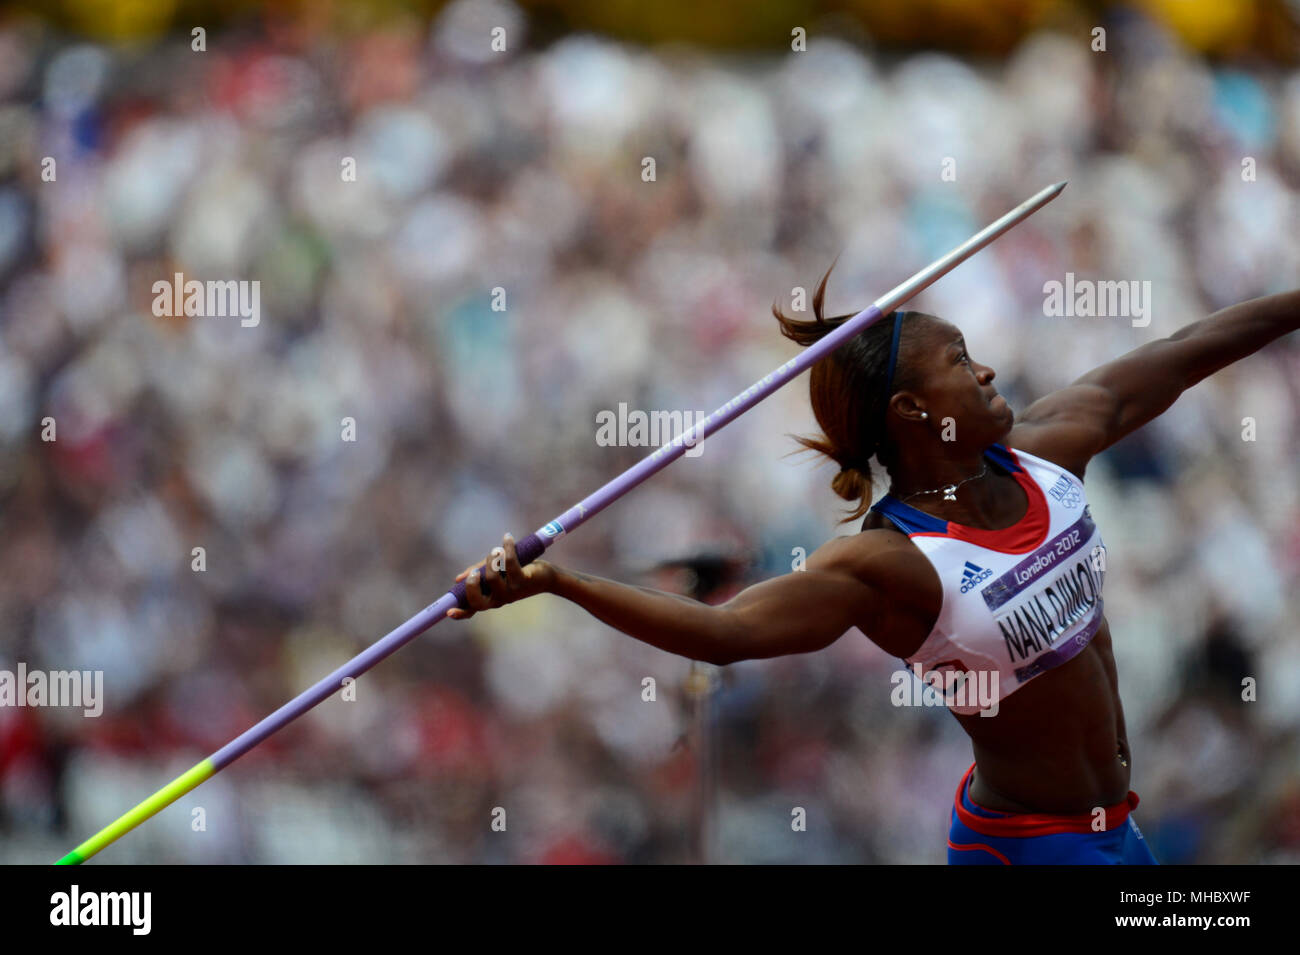 Antoinette Nana Djimou Ida of France throwing the javelin during the Heptathlon competition at the London Olympics. Stock Photo